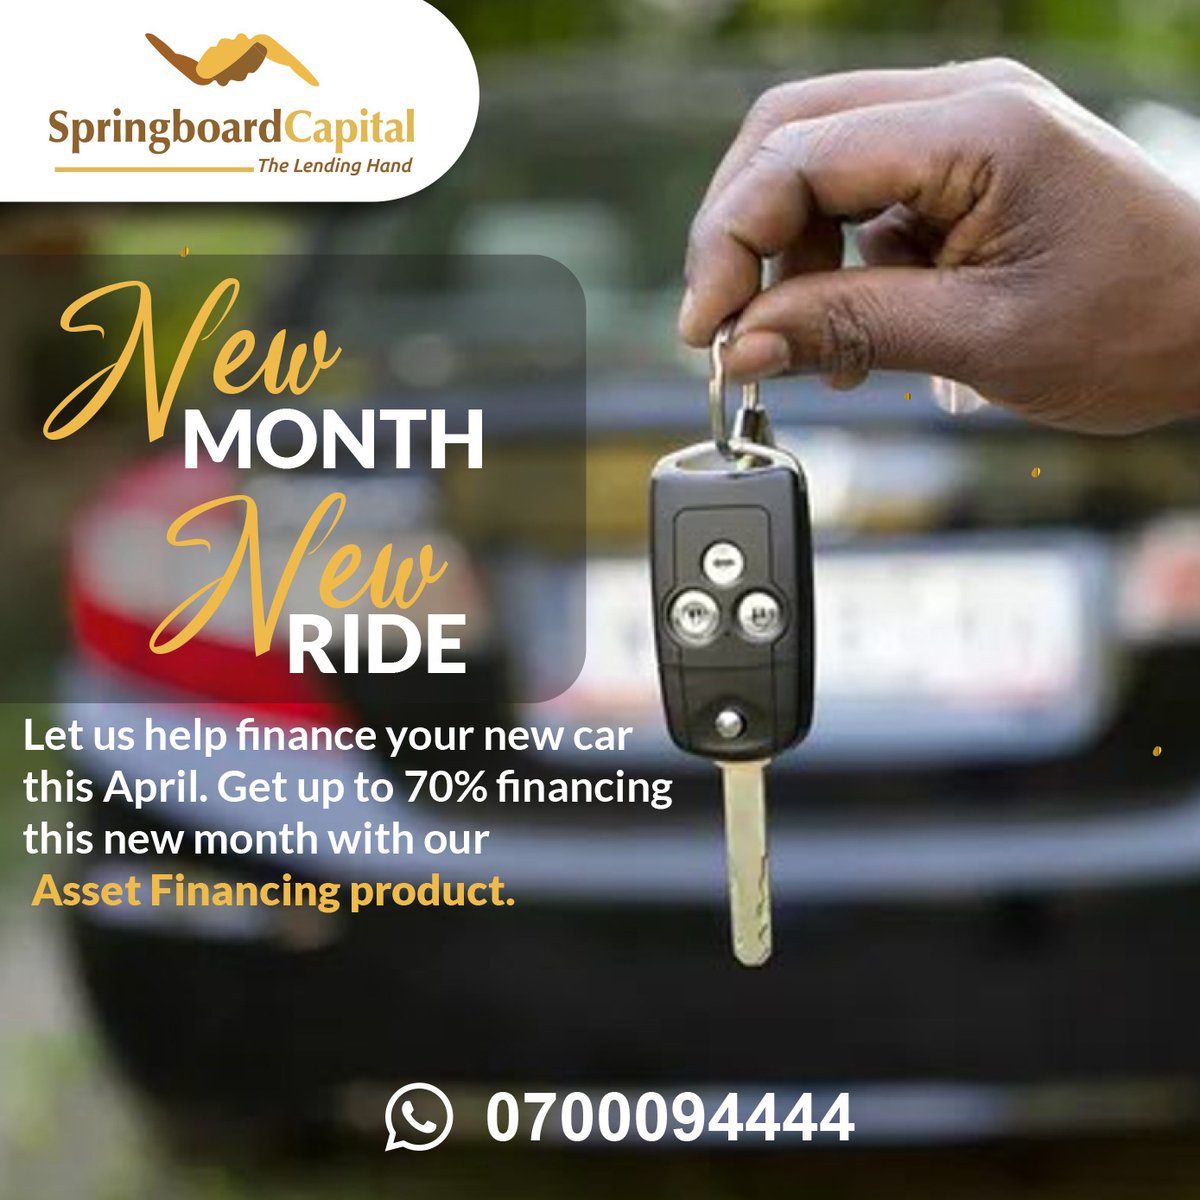 Enjoy this new month in your new vehicle!😃🚗Get upto 70% financing for your new motor vehicle with our Asset financing product.💸 To apply, visit or website: springboardcapital.co.ke/asset-financin… or Call/ WhatsApp 0700094444 today. #SBC #TheLendingHand #AssetFinancing #Loan #LogbookLoan